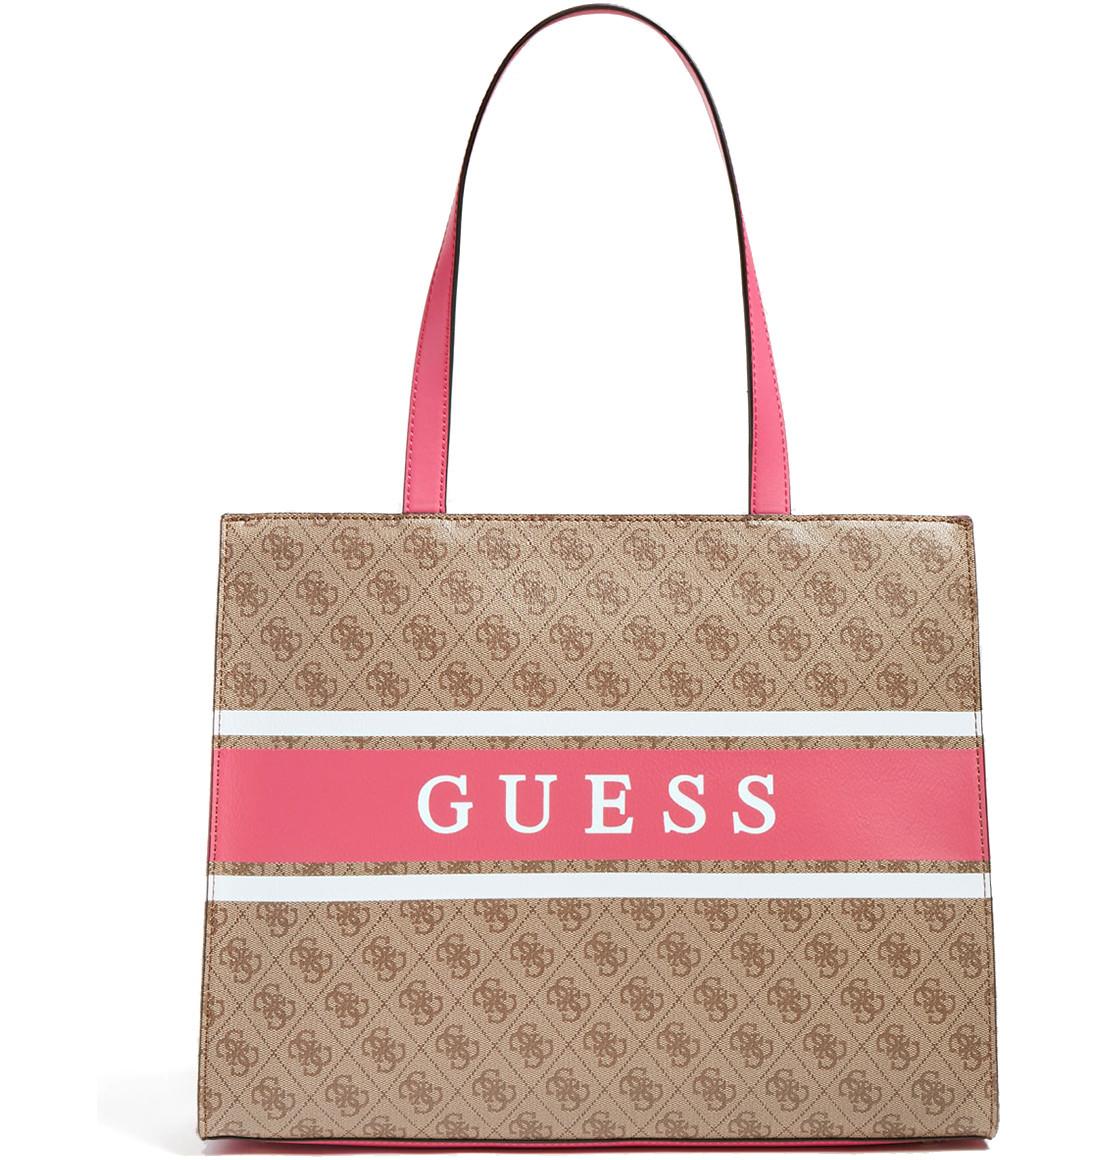 GUESS Tote Bags